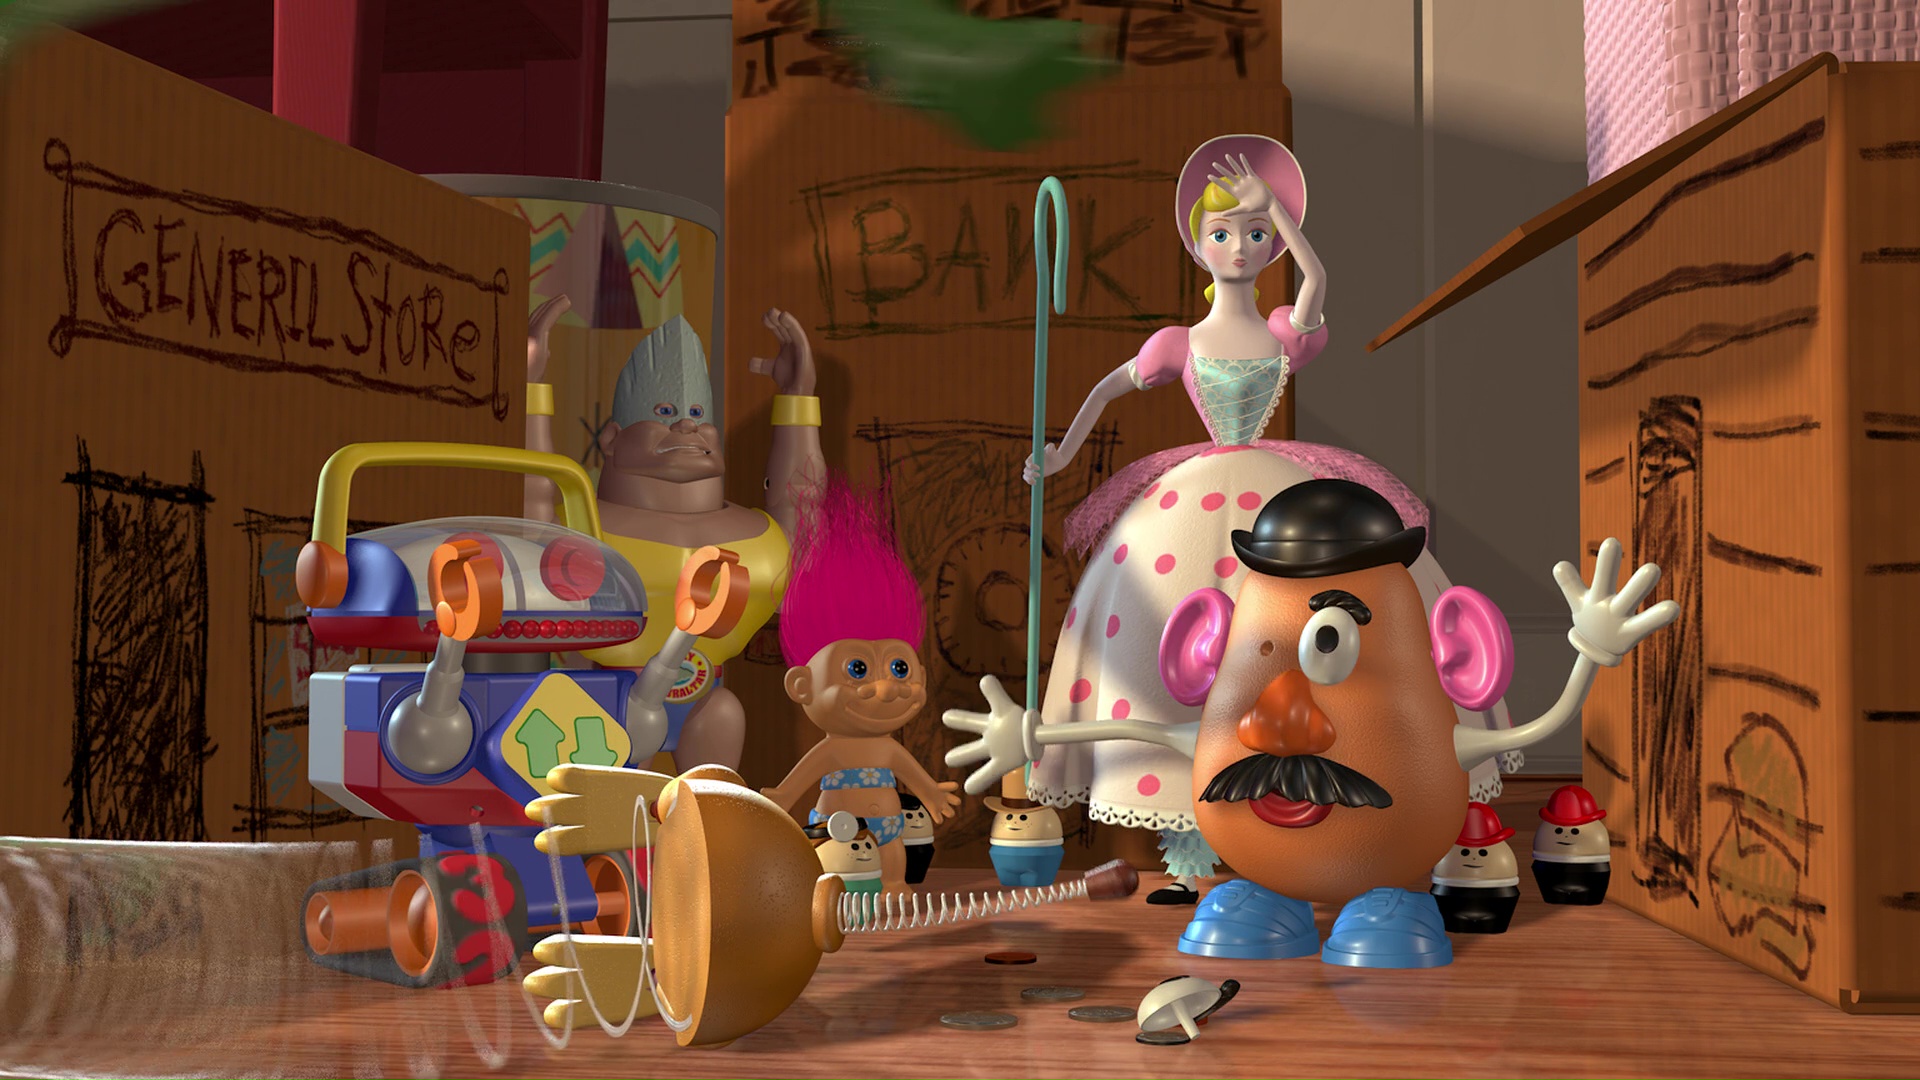 That Mr. Potato Head in Toy Story can remove one eye to become one eyed Bart but real life Mr. Potato Head's eyes are one piece: mildlyinfuriating